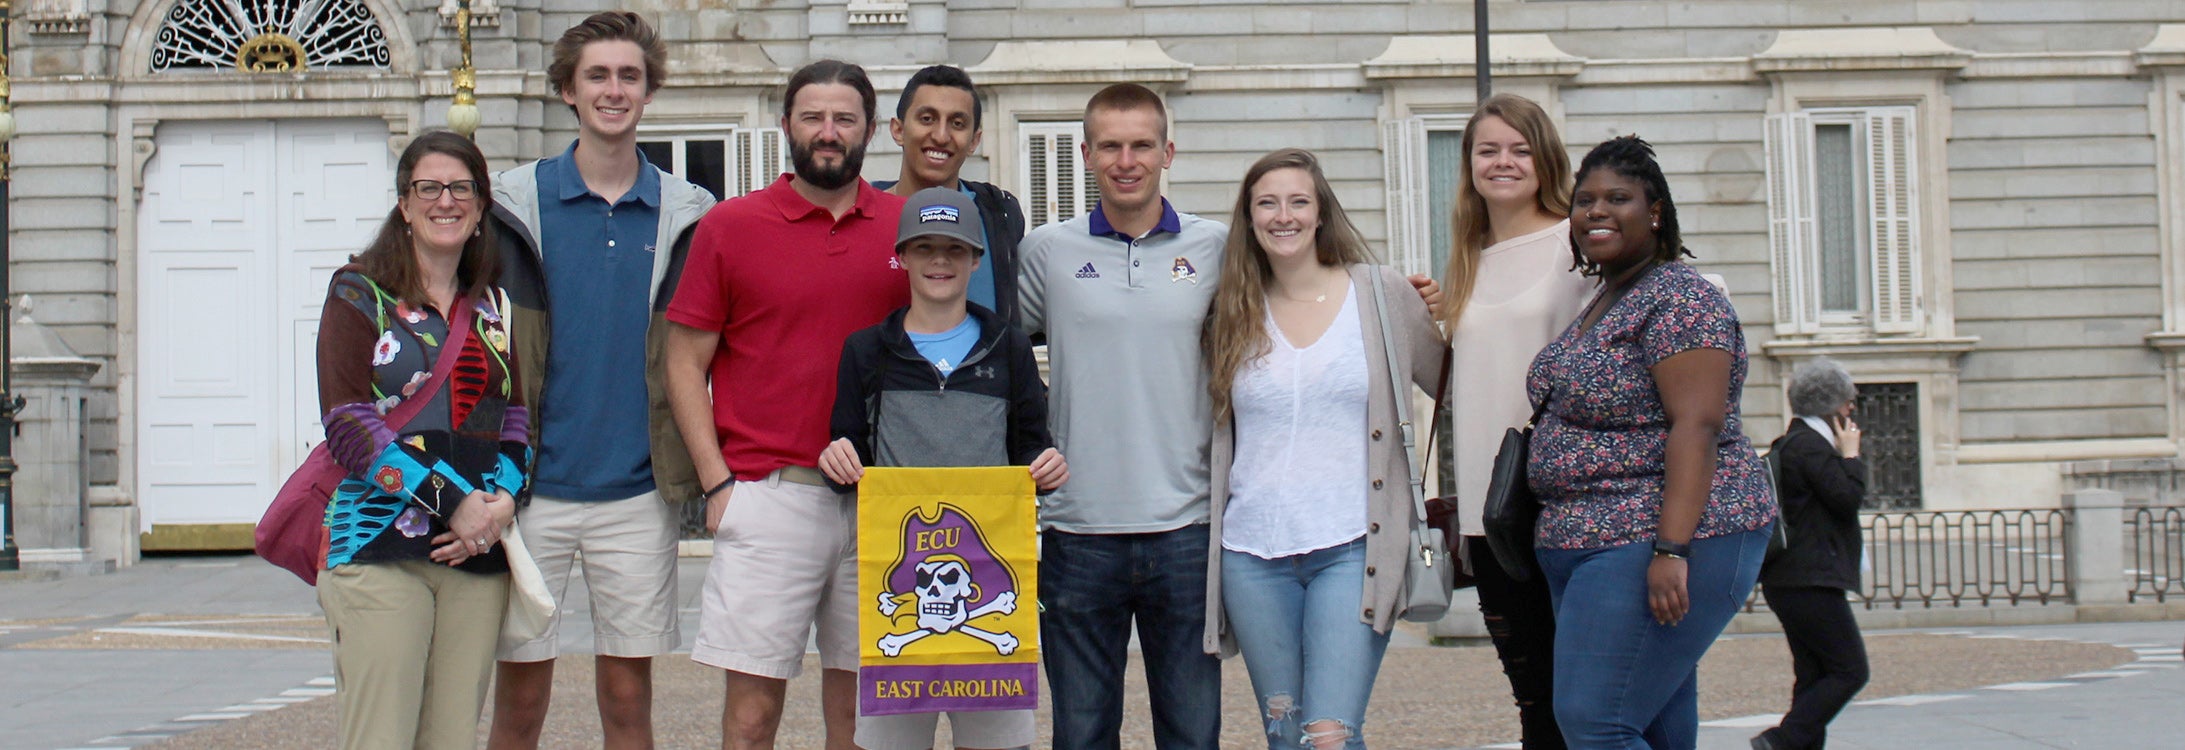 Six ECU students from the Department of Foreign Languages and Literatures and the Honors College visited the Madrid Royal Palace during their study abroad trip to Northern Spain. Seen here (left to right) are Dr. Katie Ford, Ethan Quinn, Dr. Todd Fraley and his son Keller (holding the ECU flag), Omar Sharaf, Austin Allen, Madigan Raper, Adelaide Robbins and Njisha Johnson.